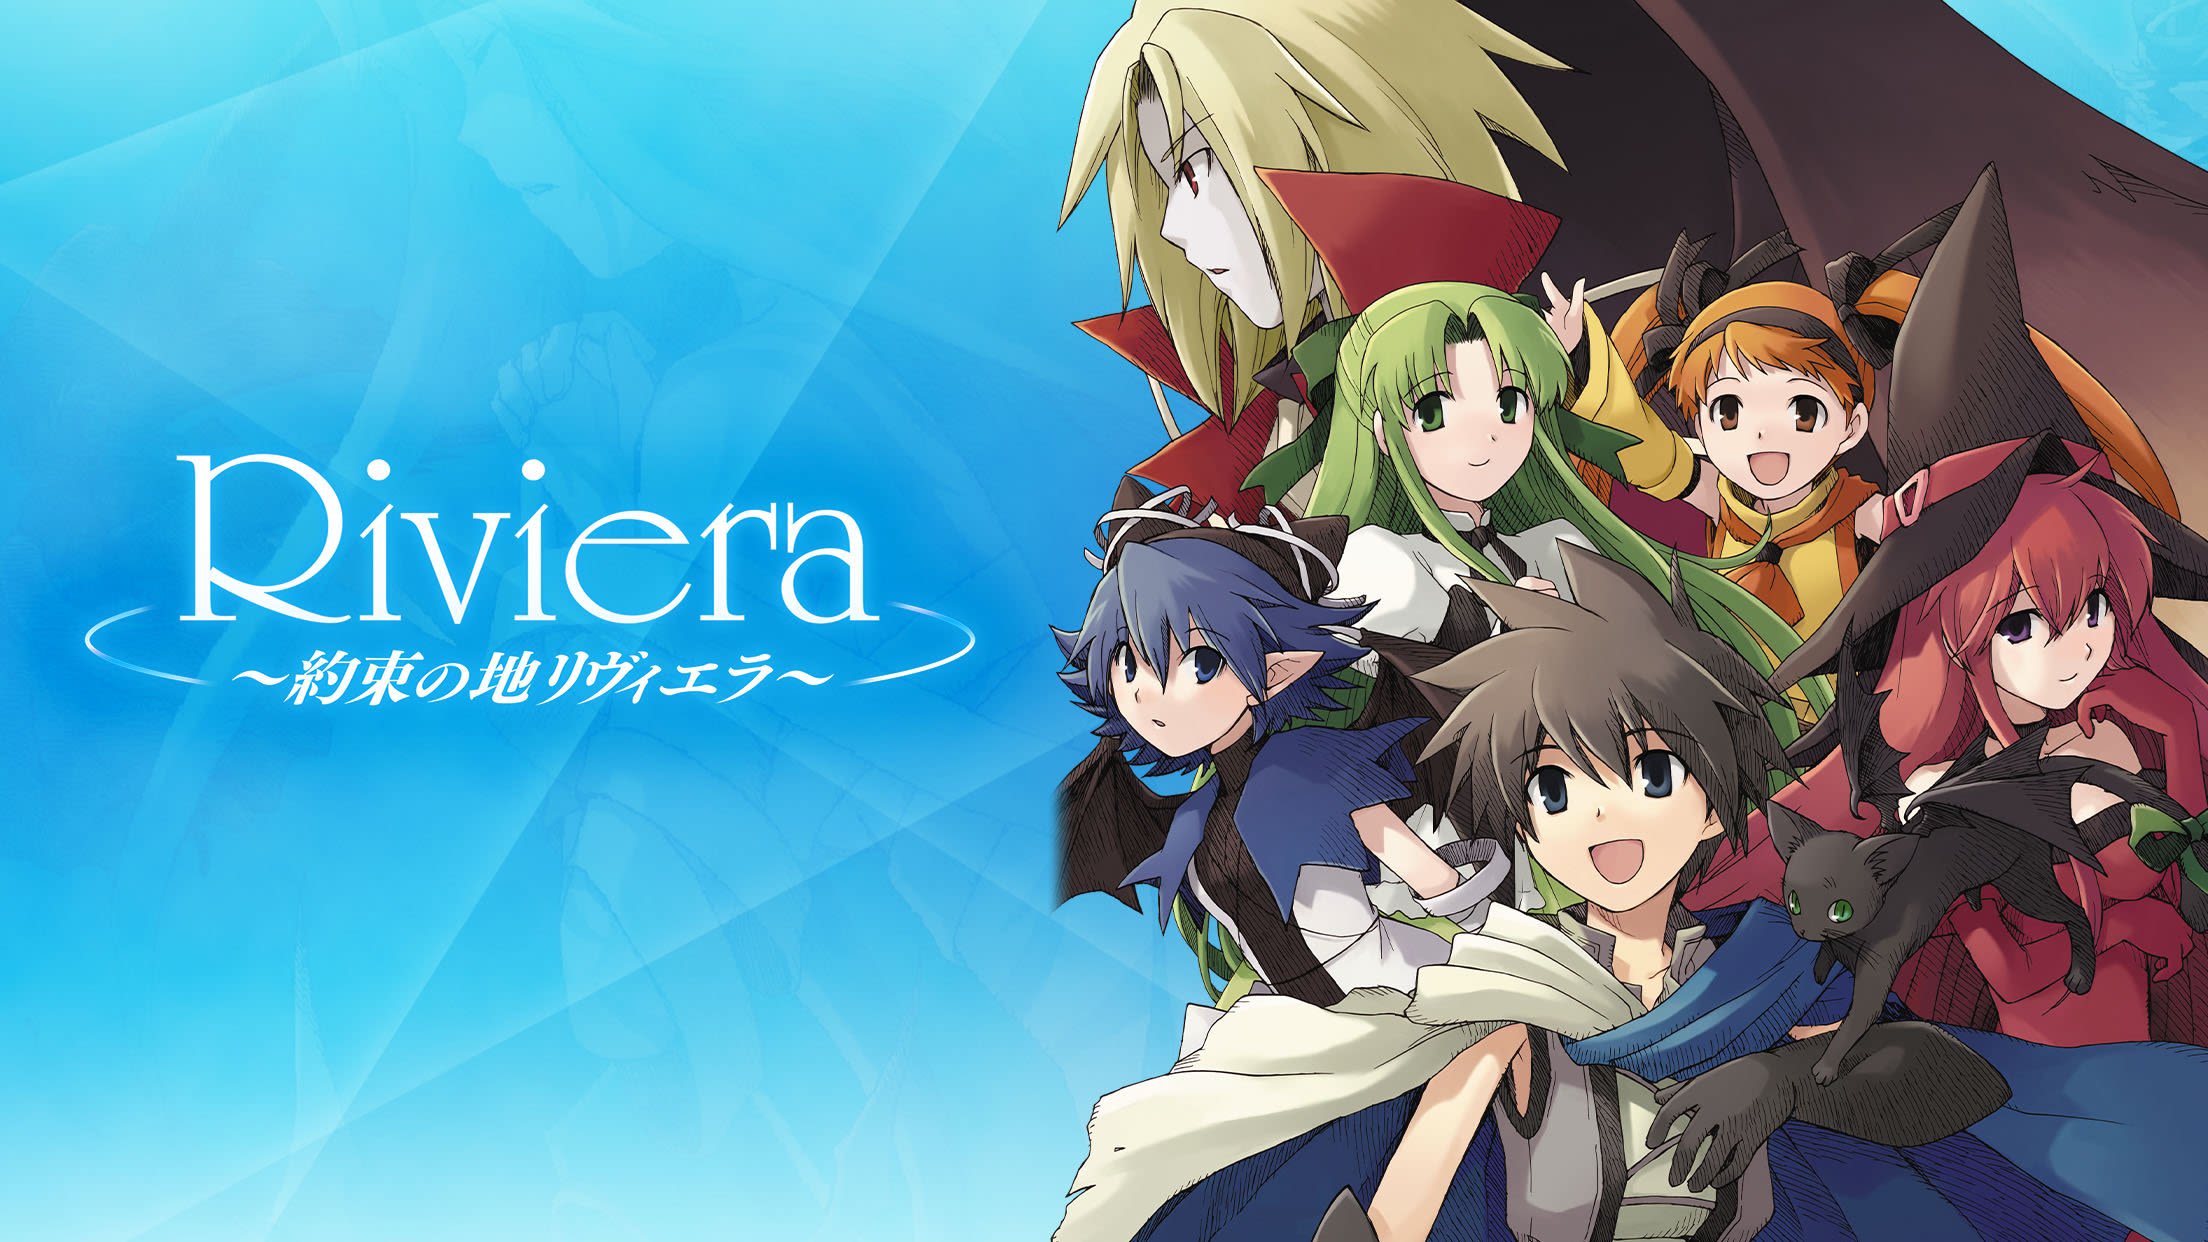 Riviera: The Promised Land remaster now available for iOS, Android in Japan